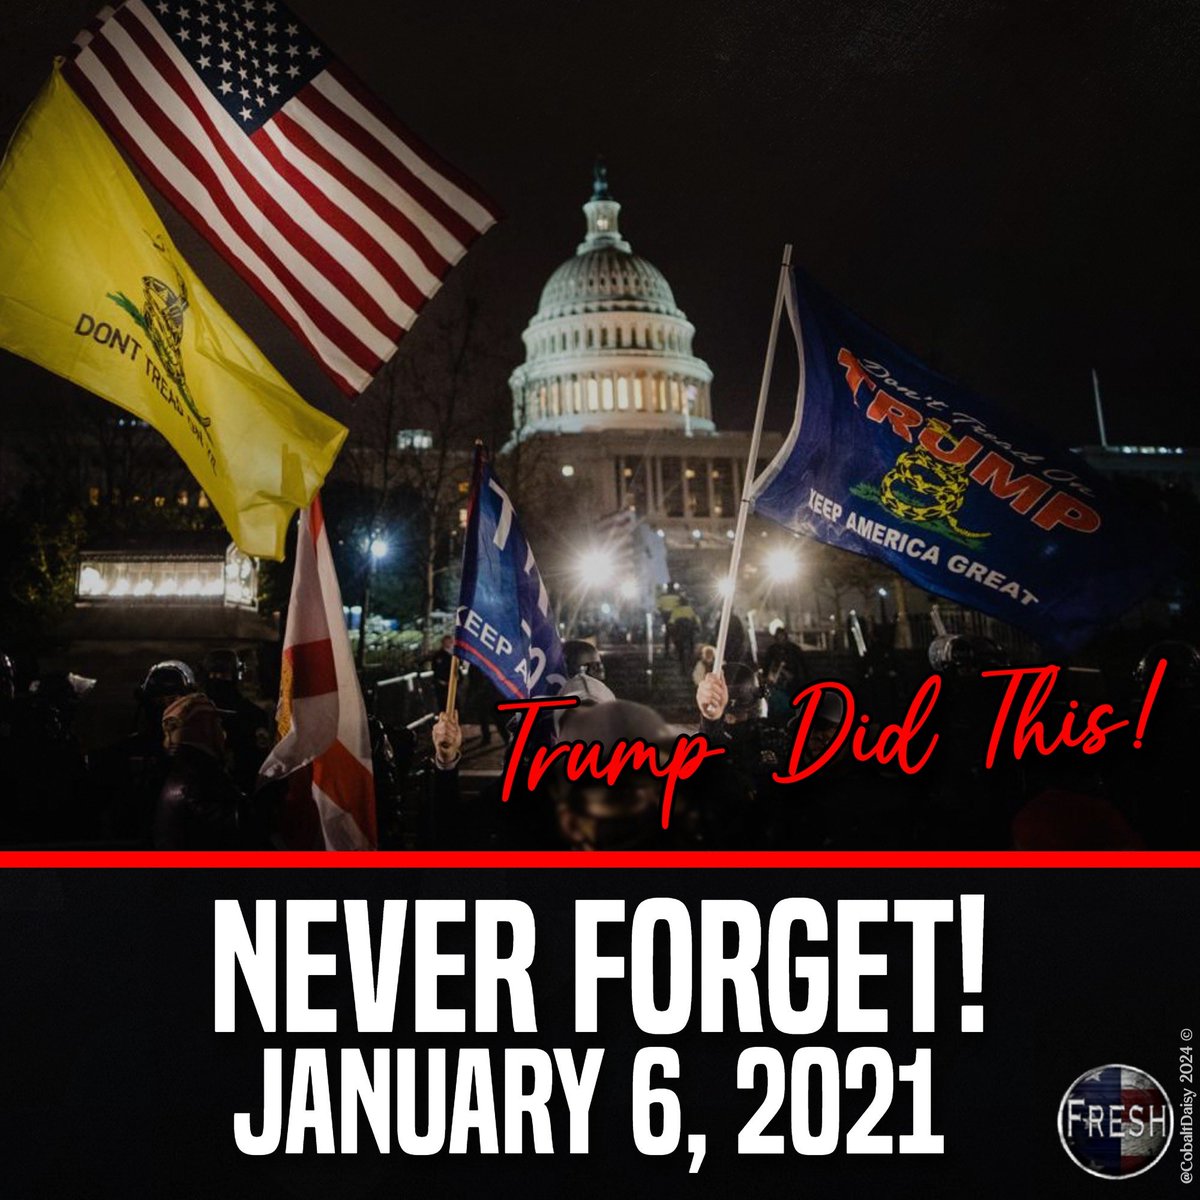 With all this irrelevant talk about Trump embarrassing himself in the courtroom, do not lose sight of the fact that on January 6, 2021, he sent domestic terrorists to the Capital. He told them to “fight like hell” - and they did. Americans died while he watched the violence on…